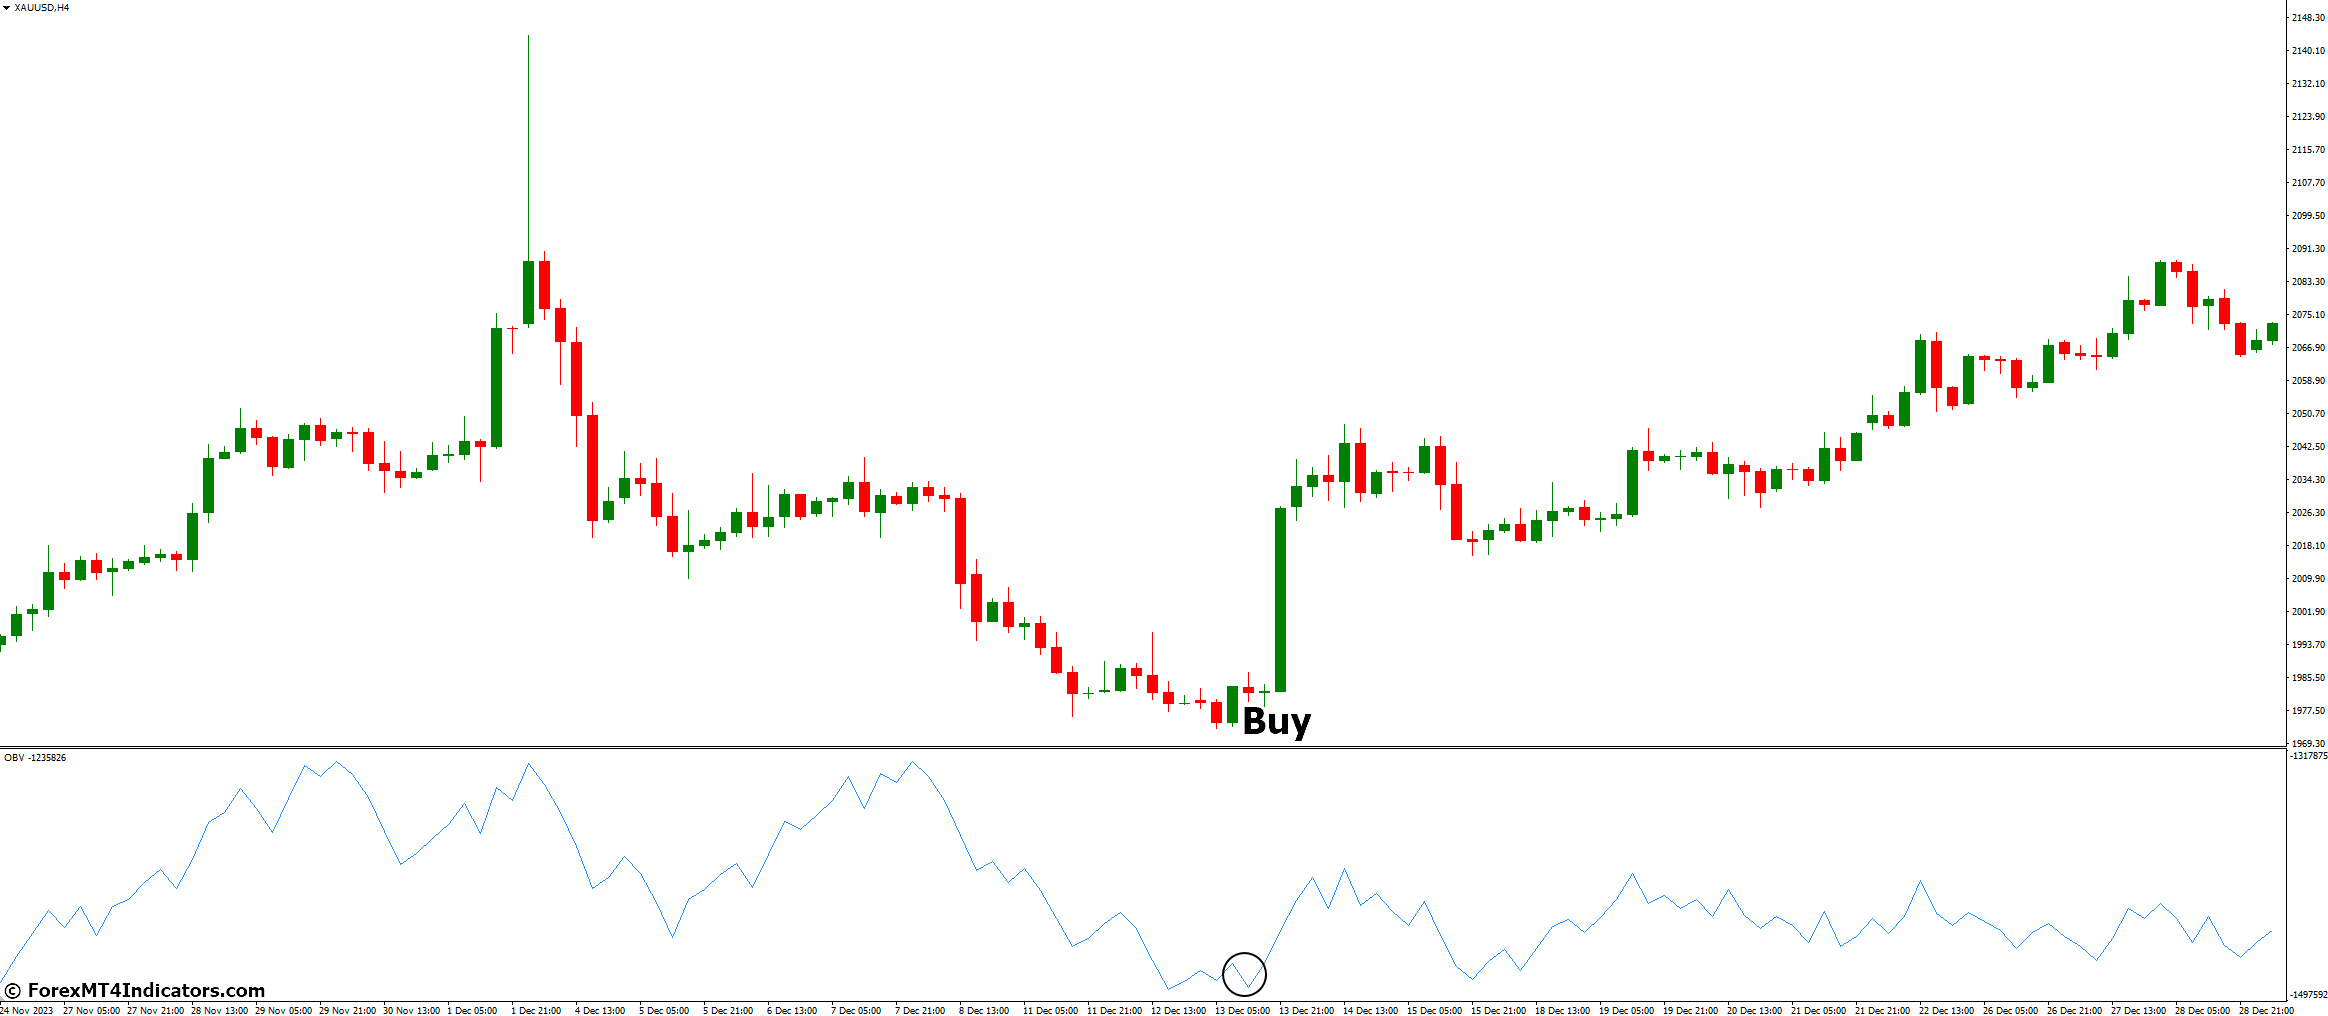 How to Trade with OBV MT4 Indicator - Buy Entry